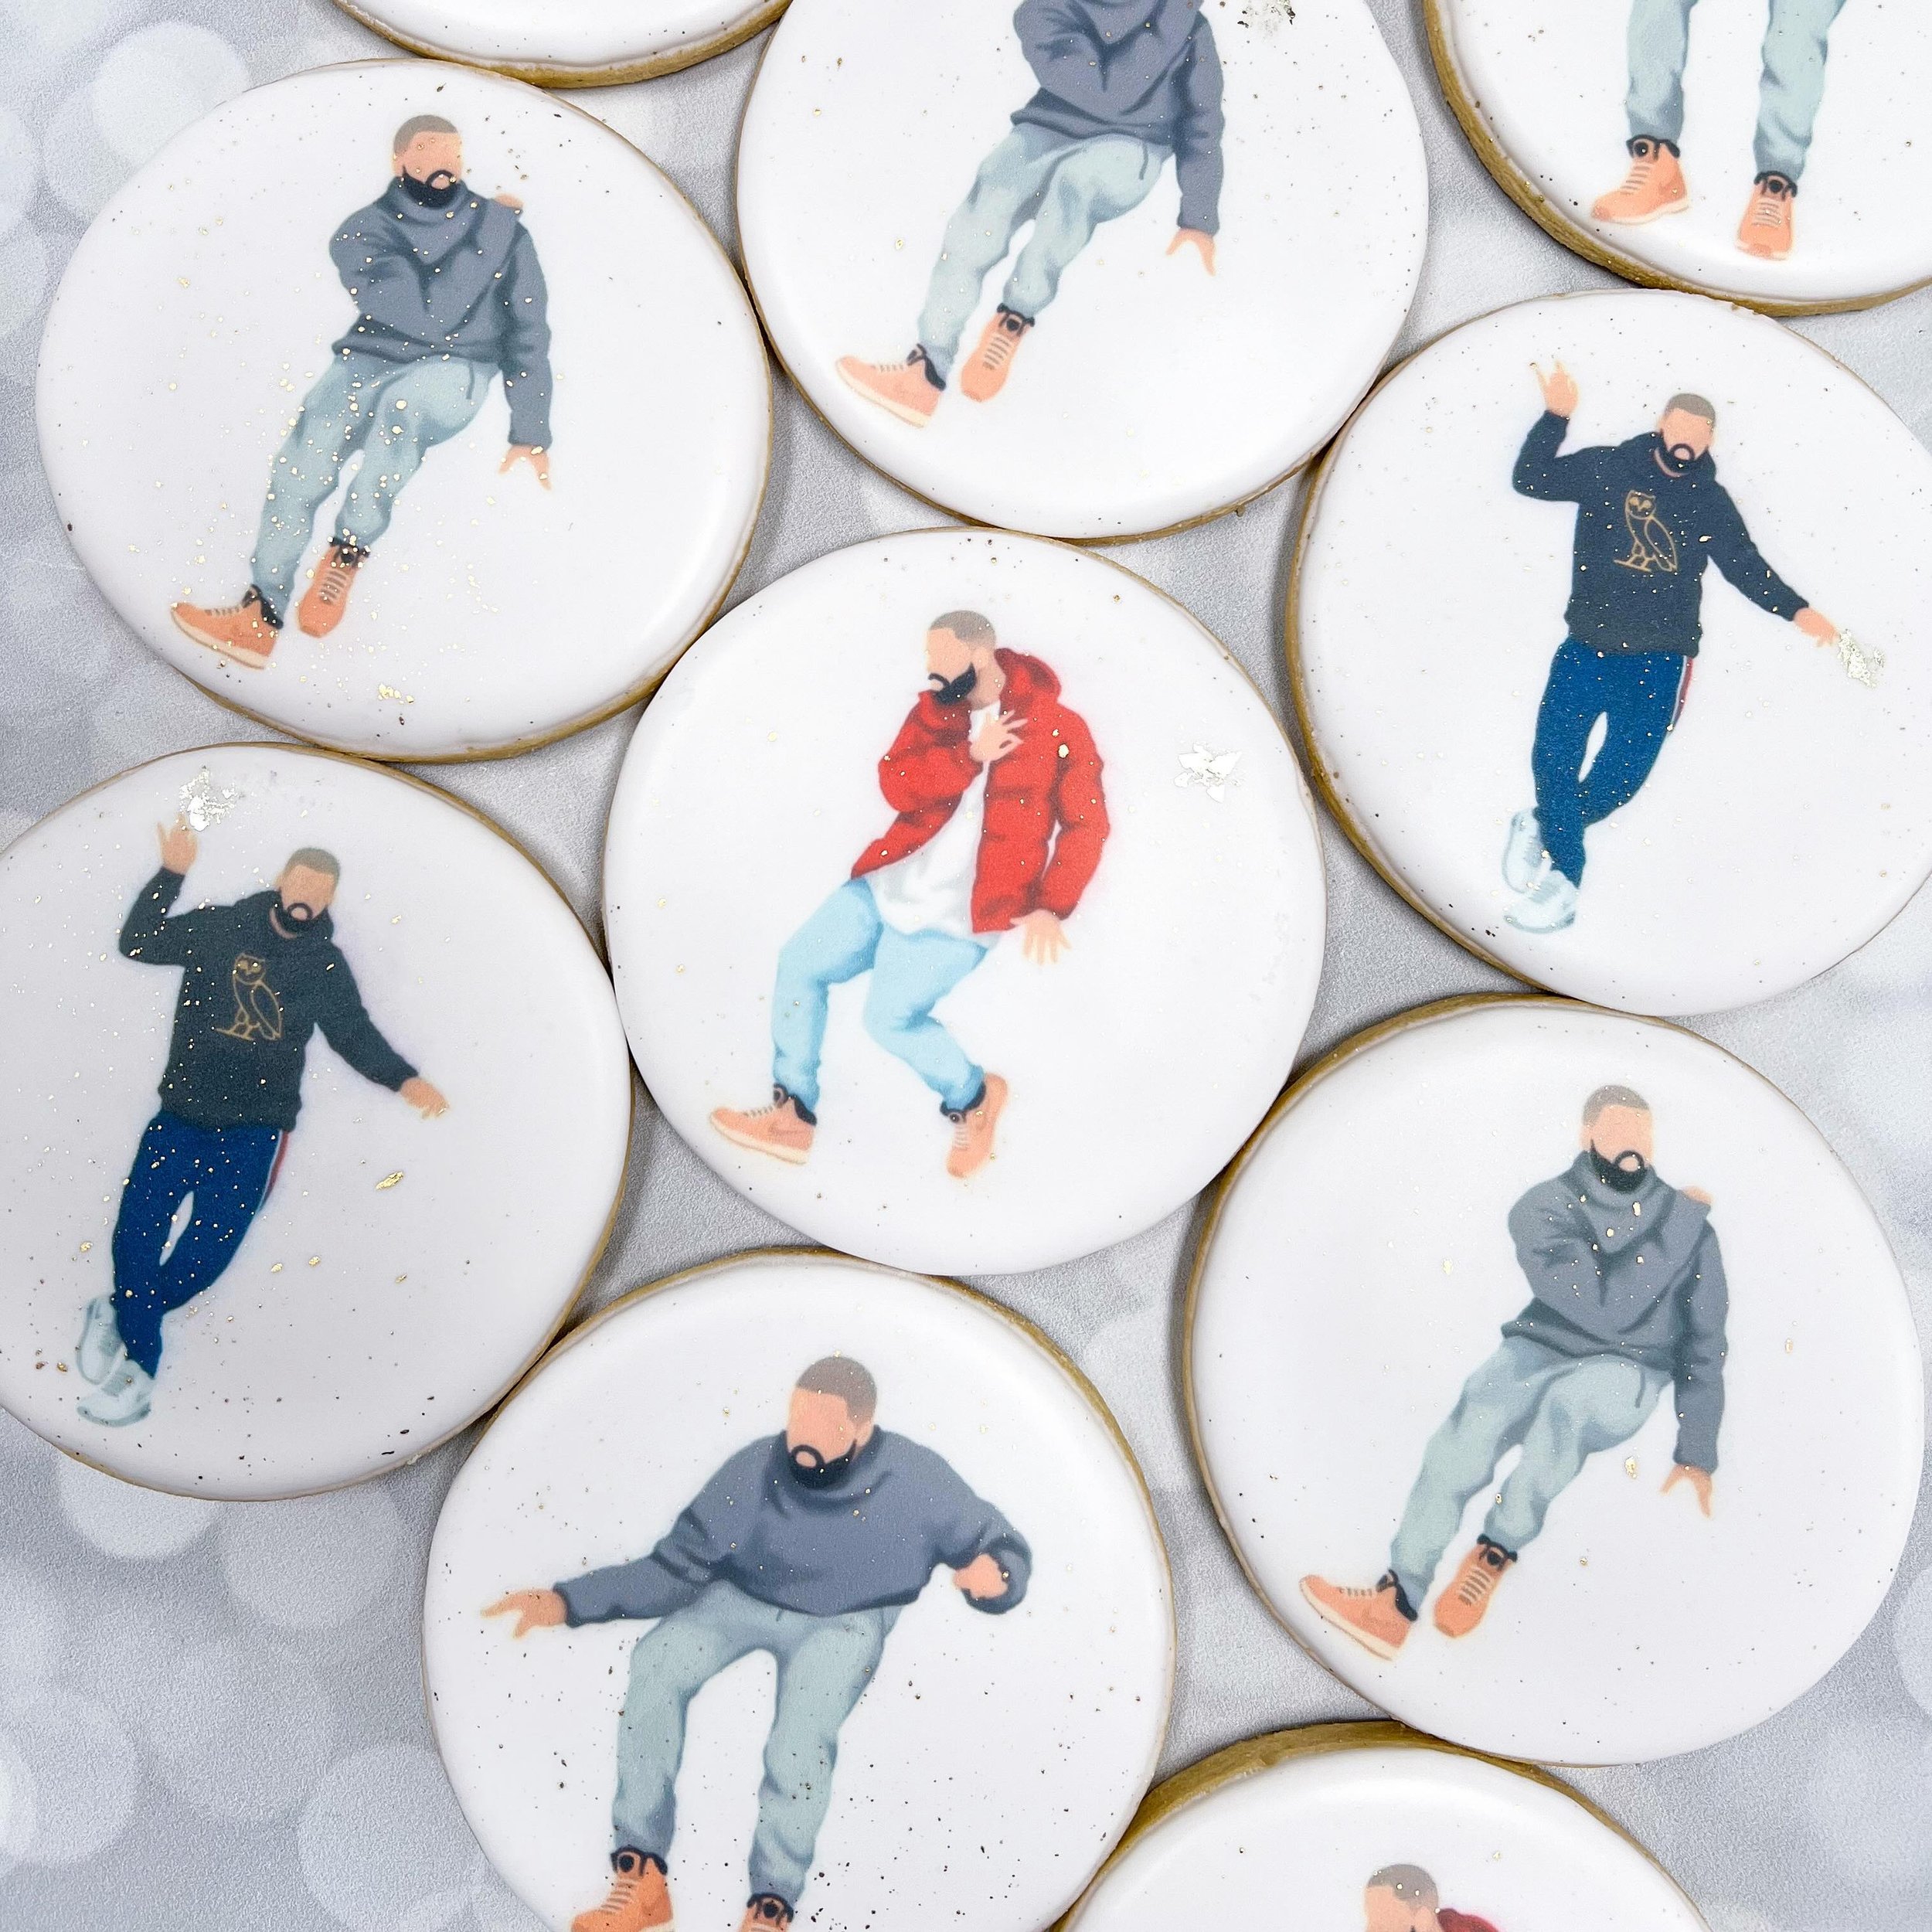 Favourite cookies from last week 🎶

Custom Drake @champagnepapi cookies, made using awesome digital art from @drawmeasong

#comfortbakeshop